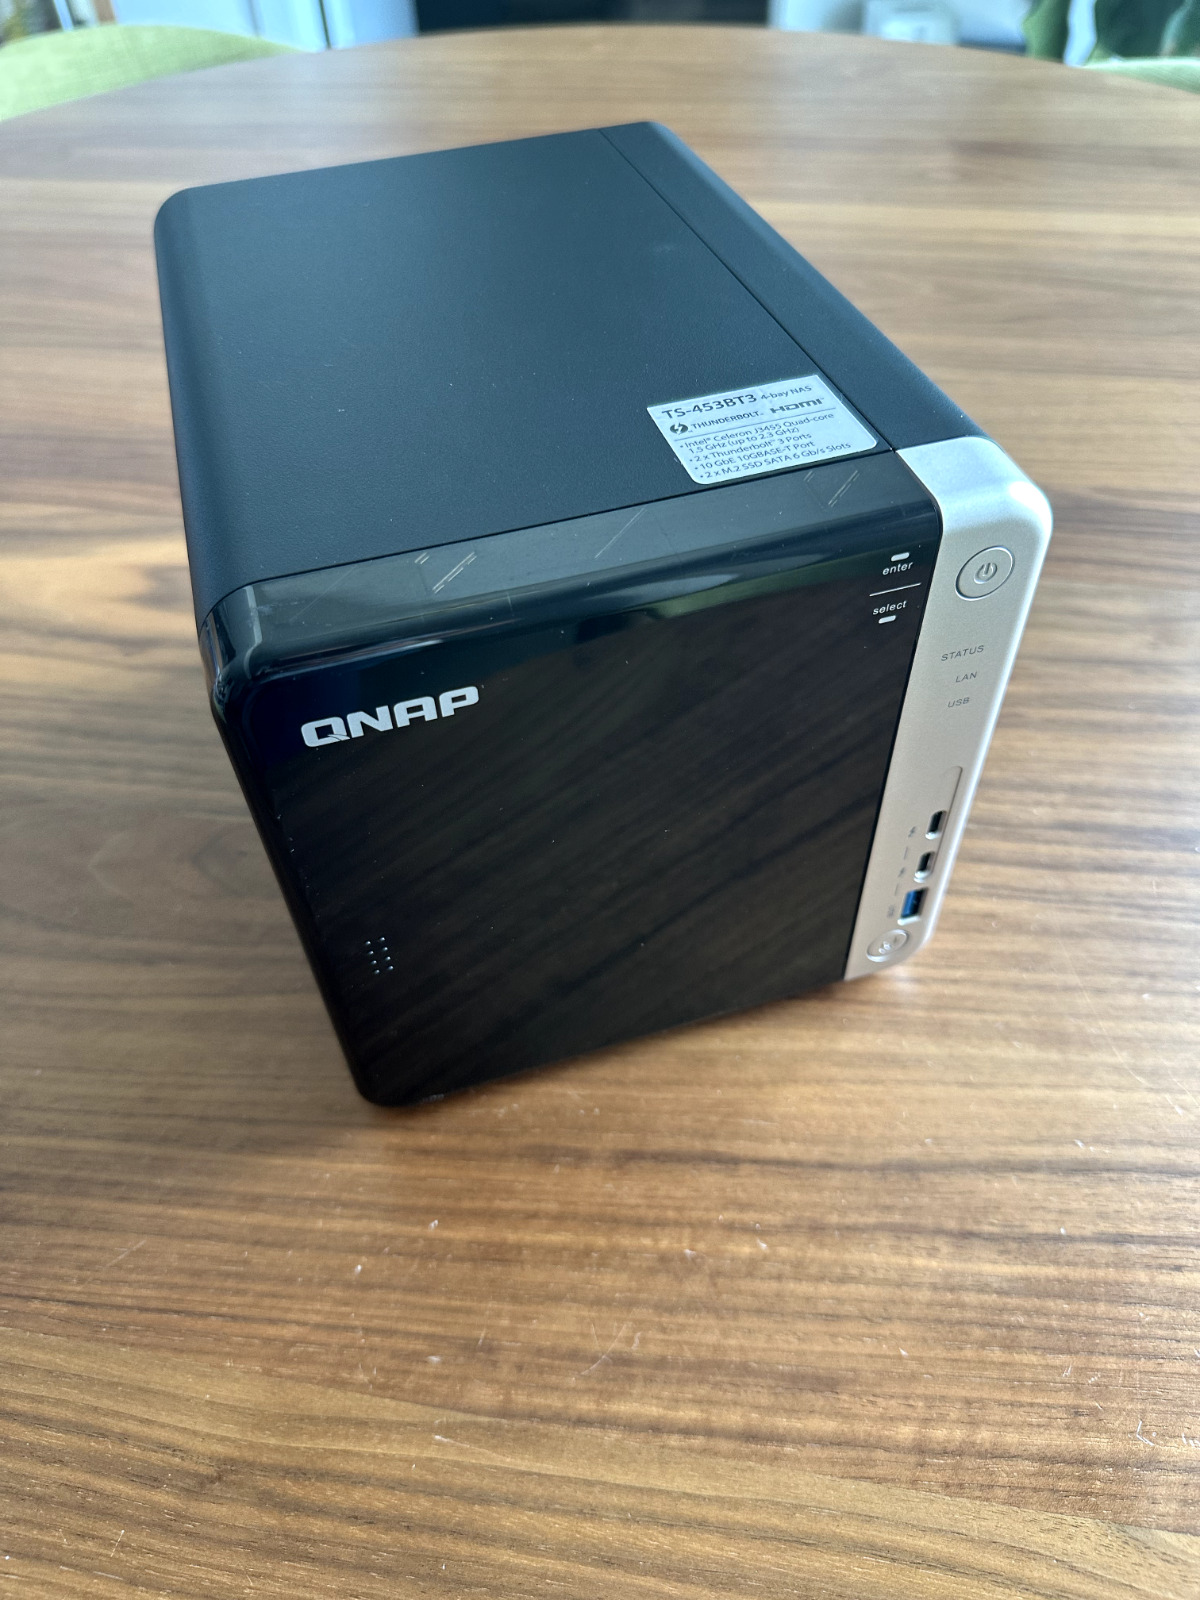 QNAP TS-453BT3 NAS with Thunderbolt 3 and 4x 10TB Ironwolf Drives